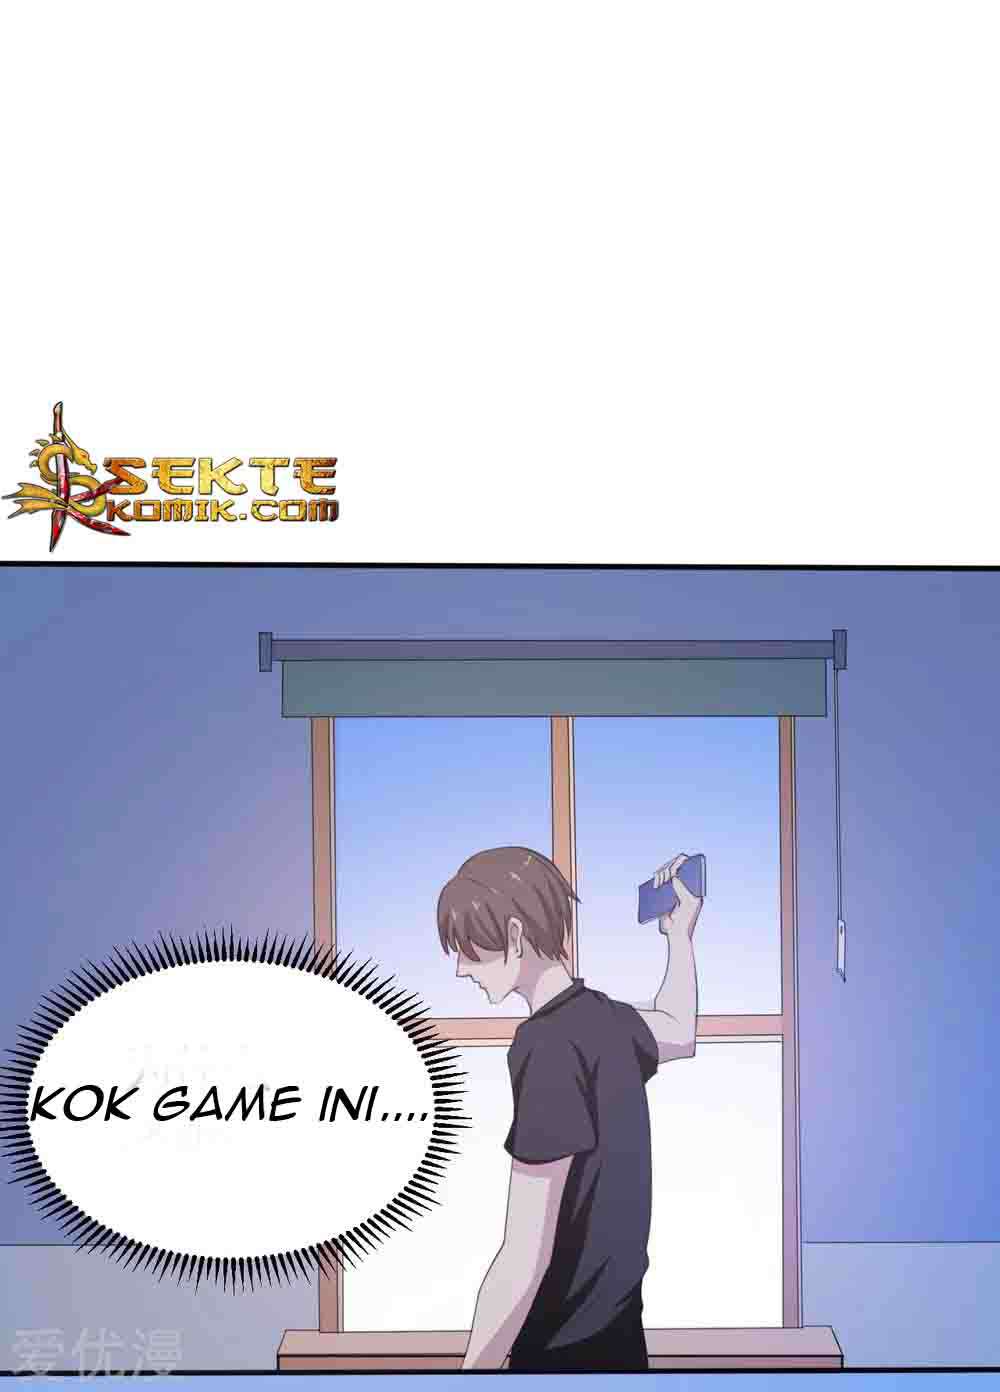 Godly Mobile Game Chapter 1